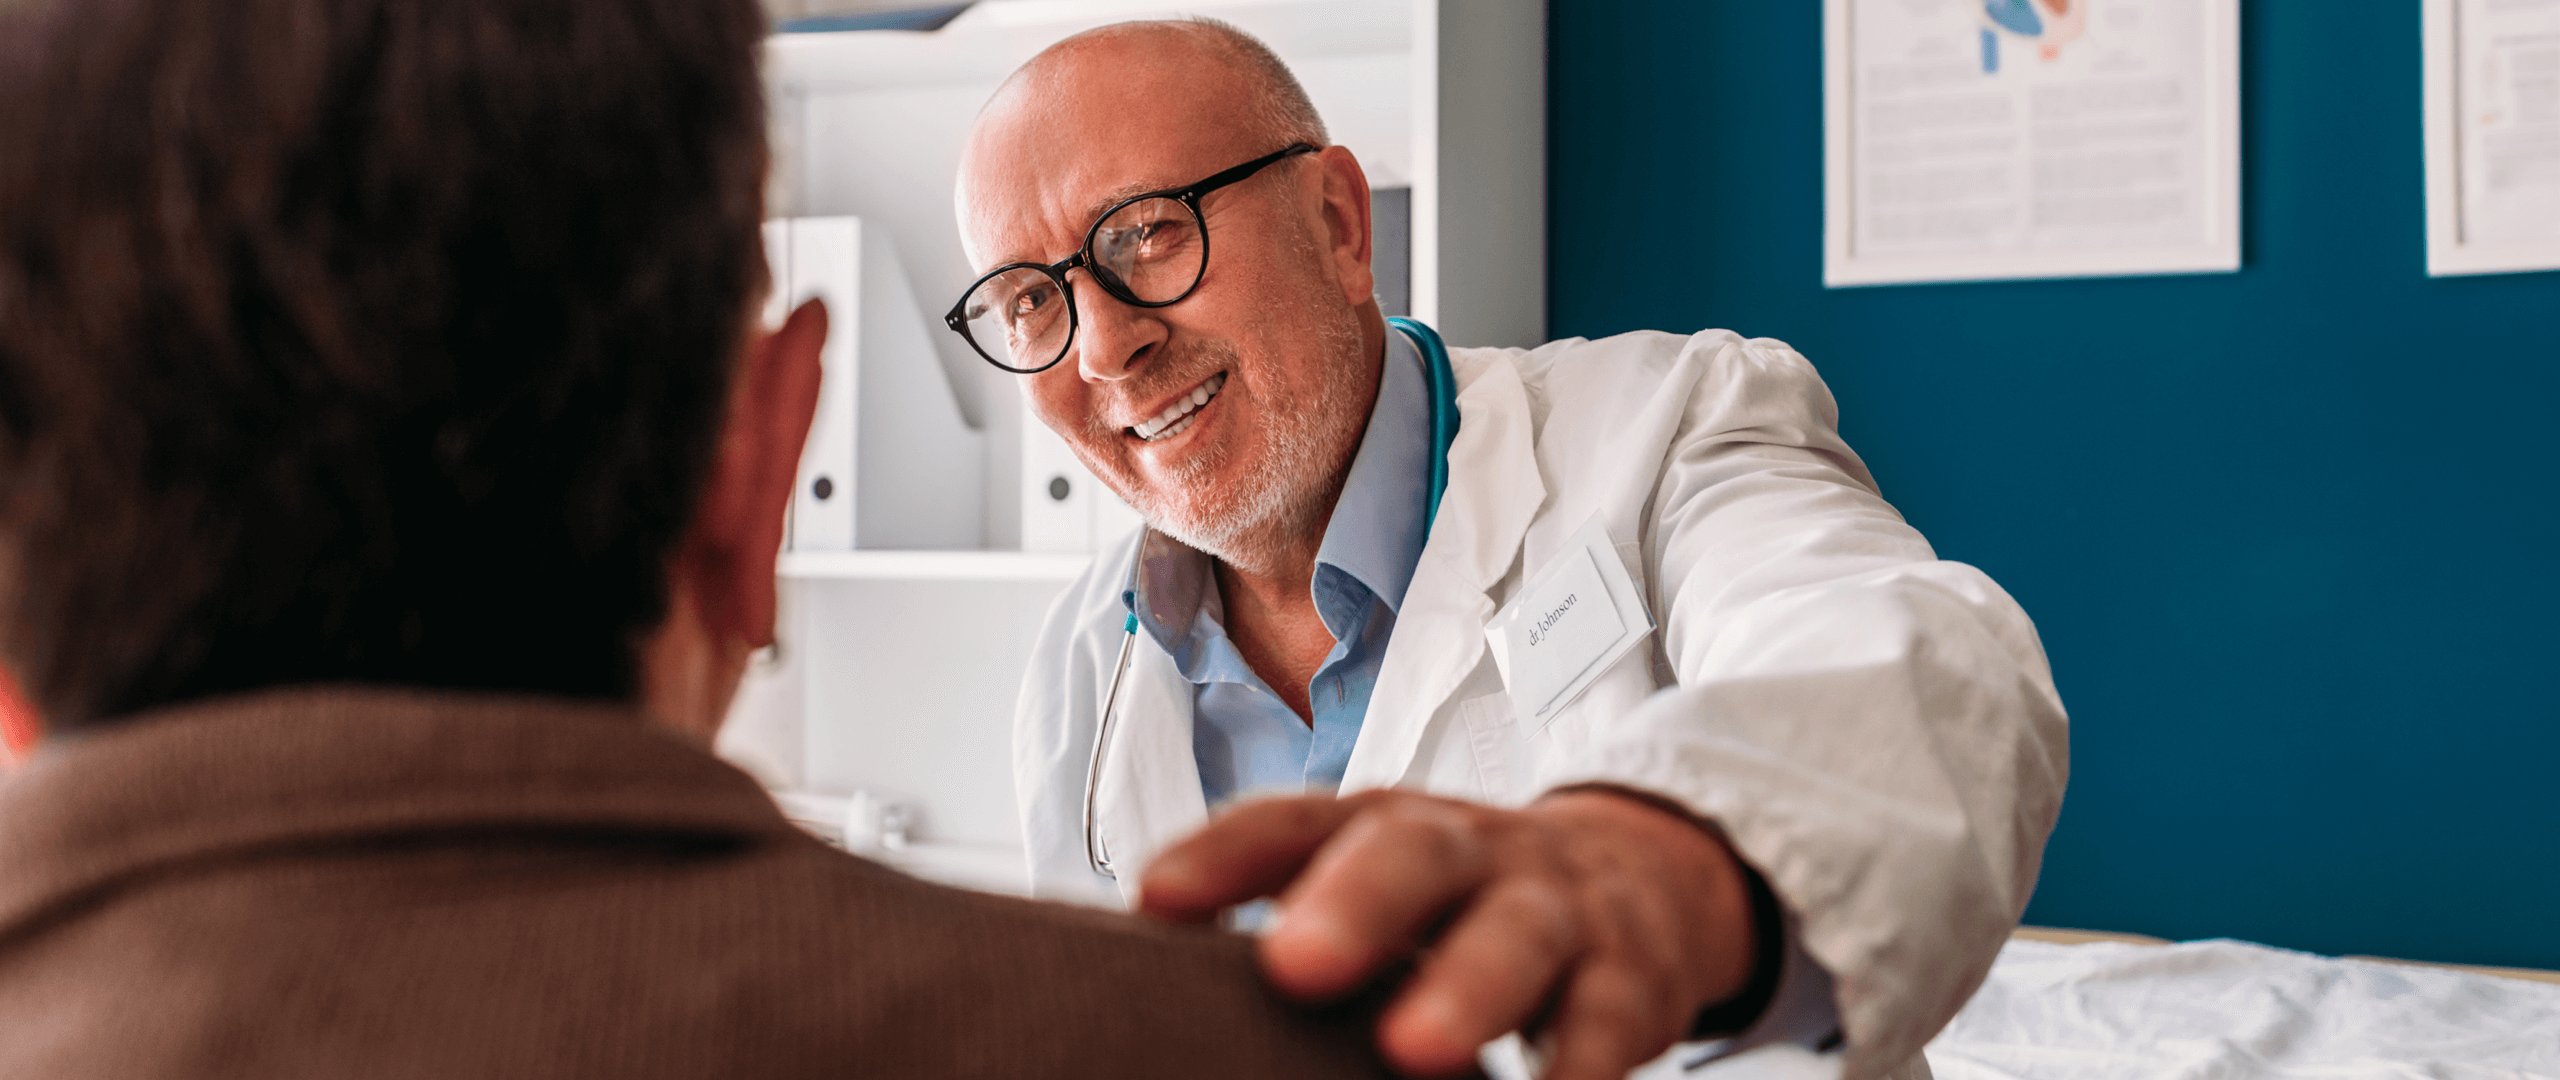 Portrait of physician with glasses and stethoscope around his neck examining senior patient